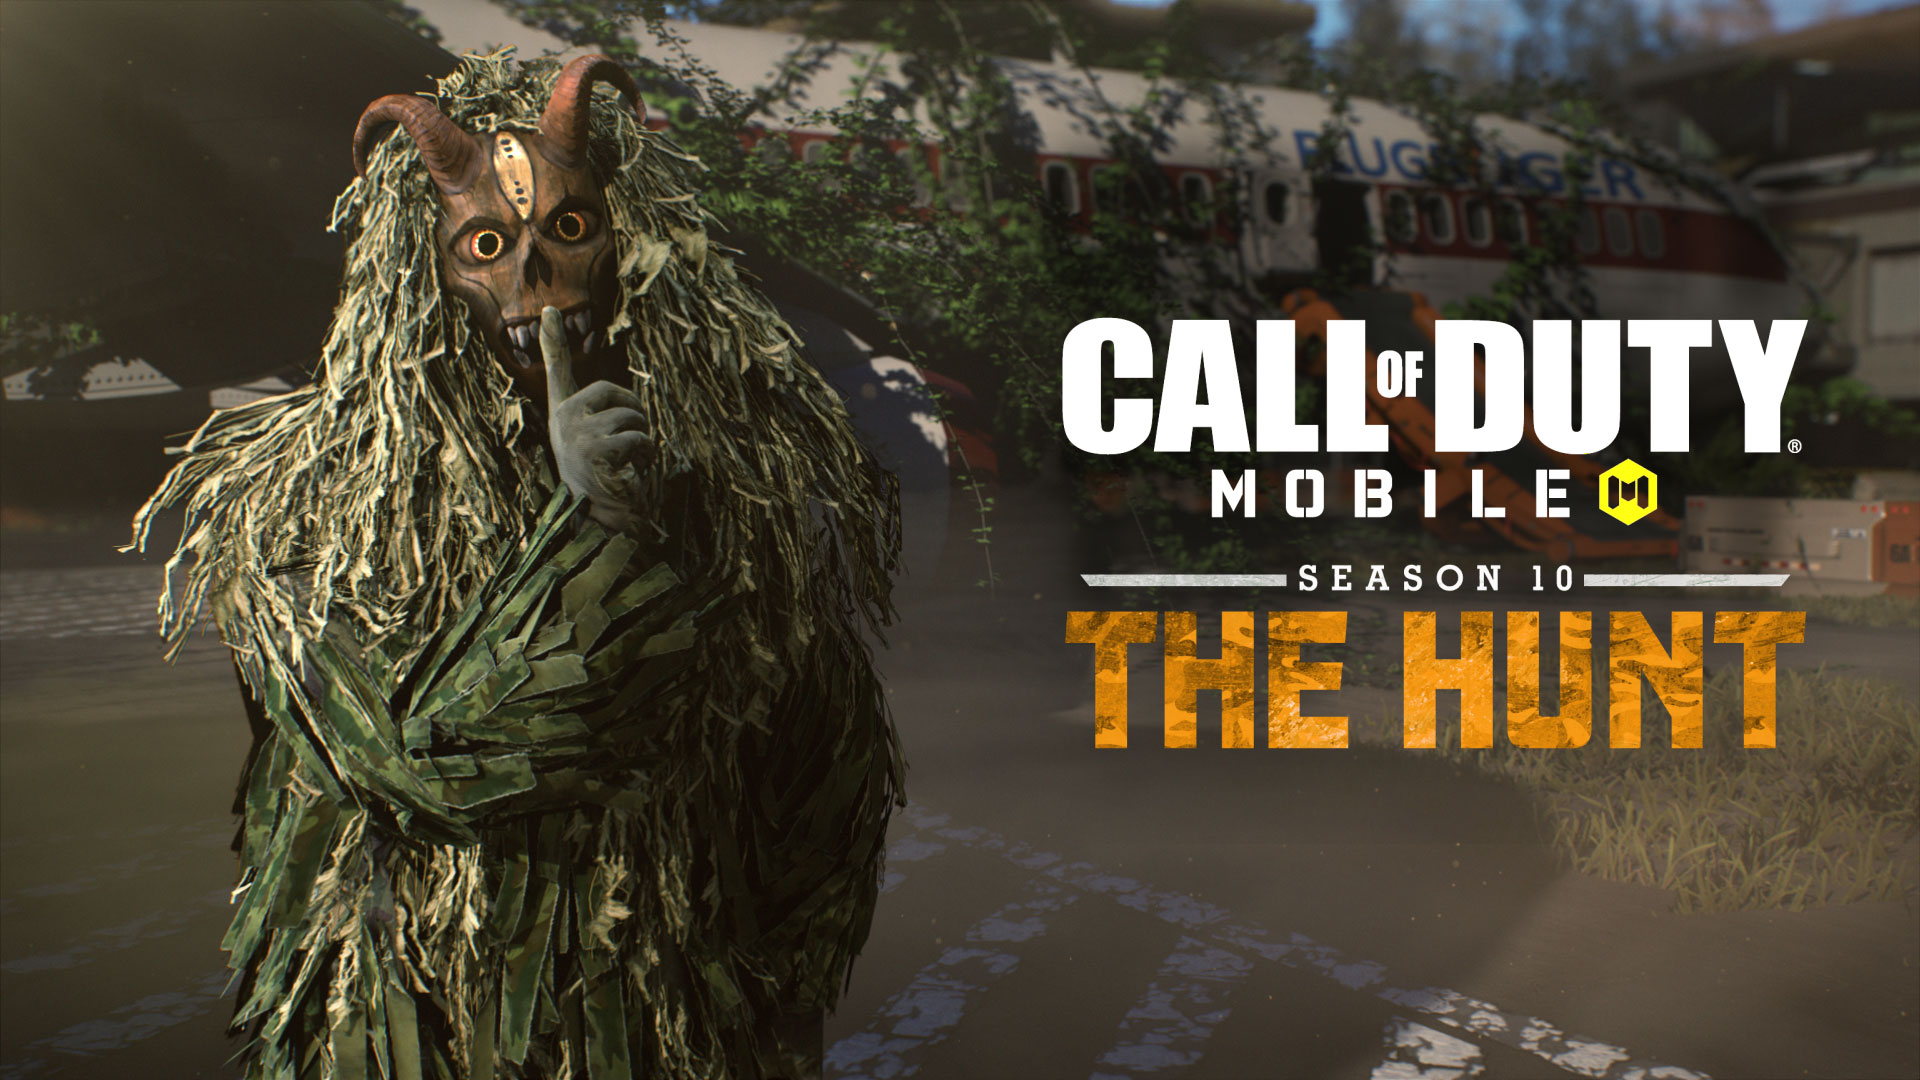 Guys, will release of warzone mobile affect cod mobile? Will they